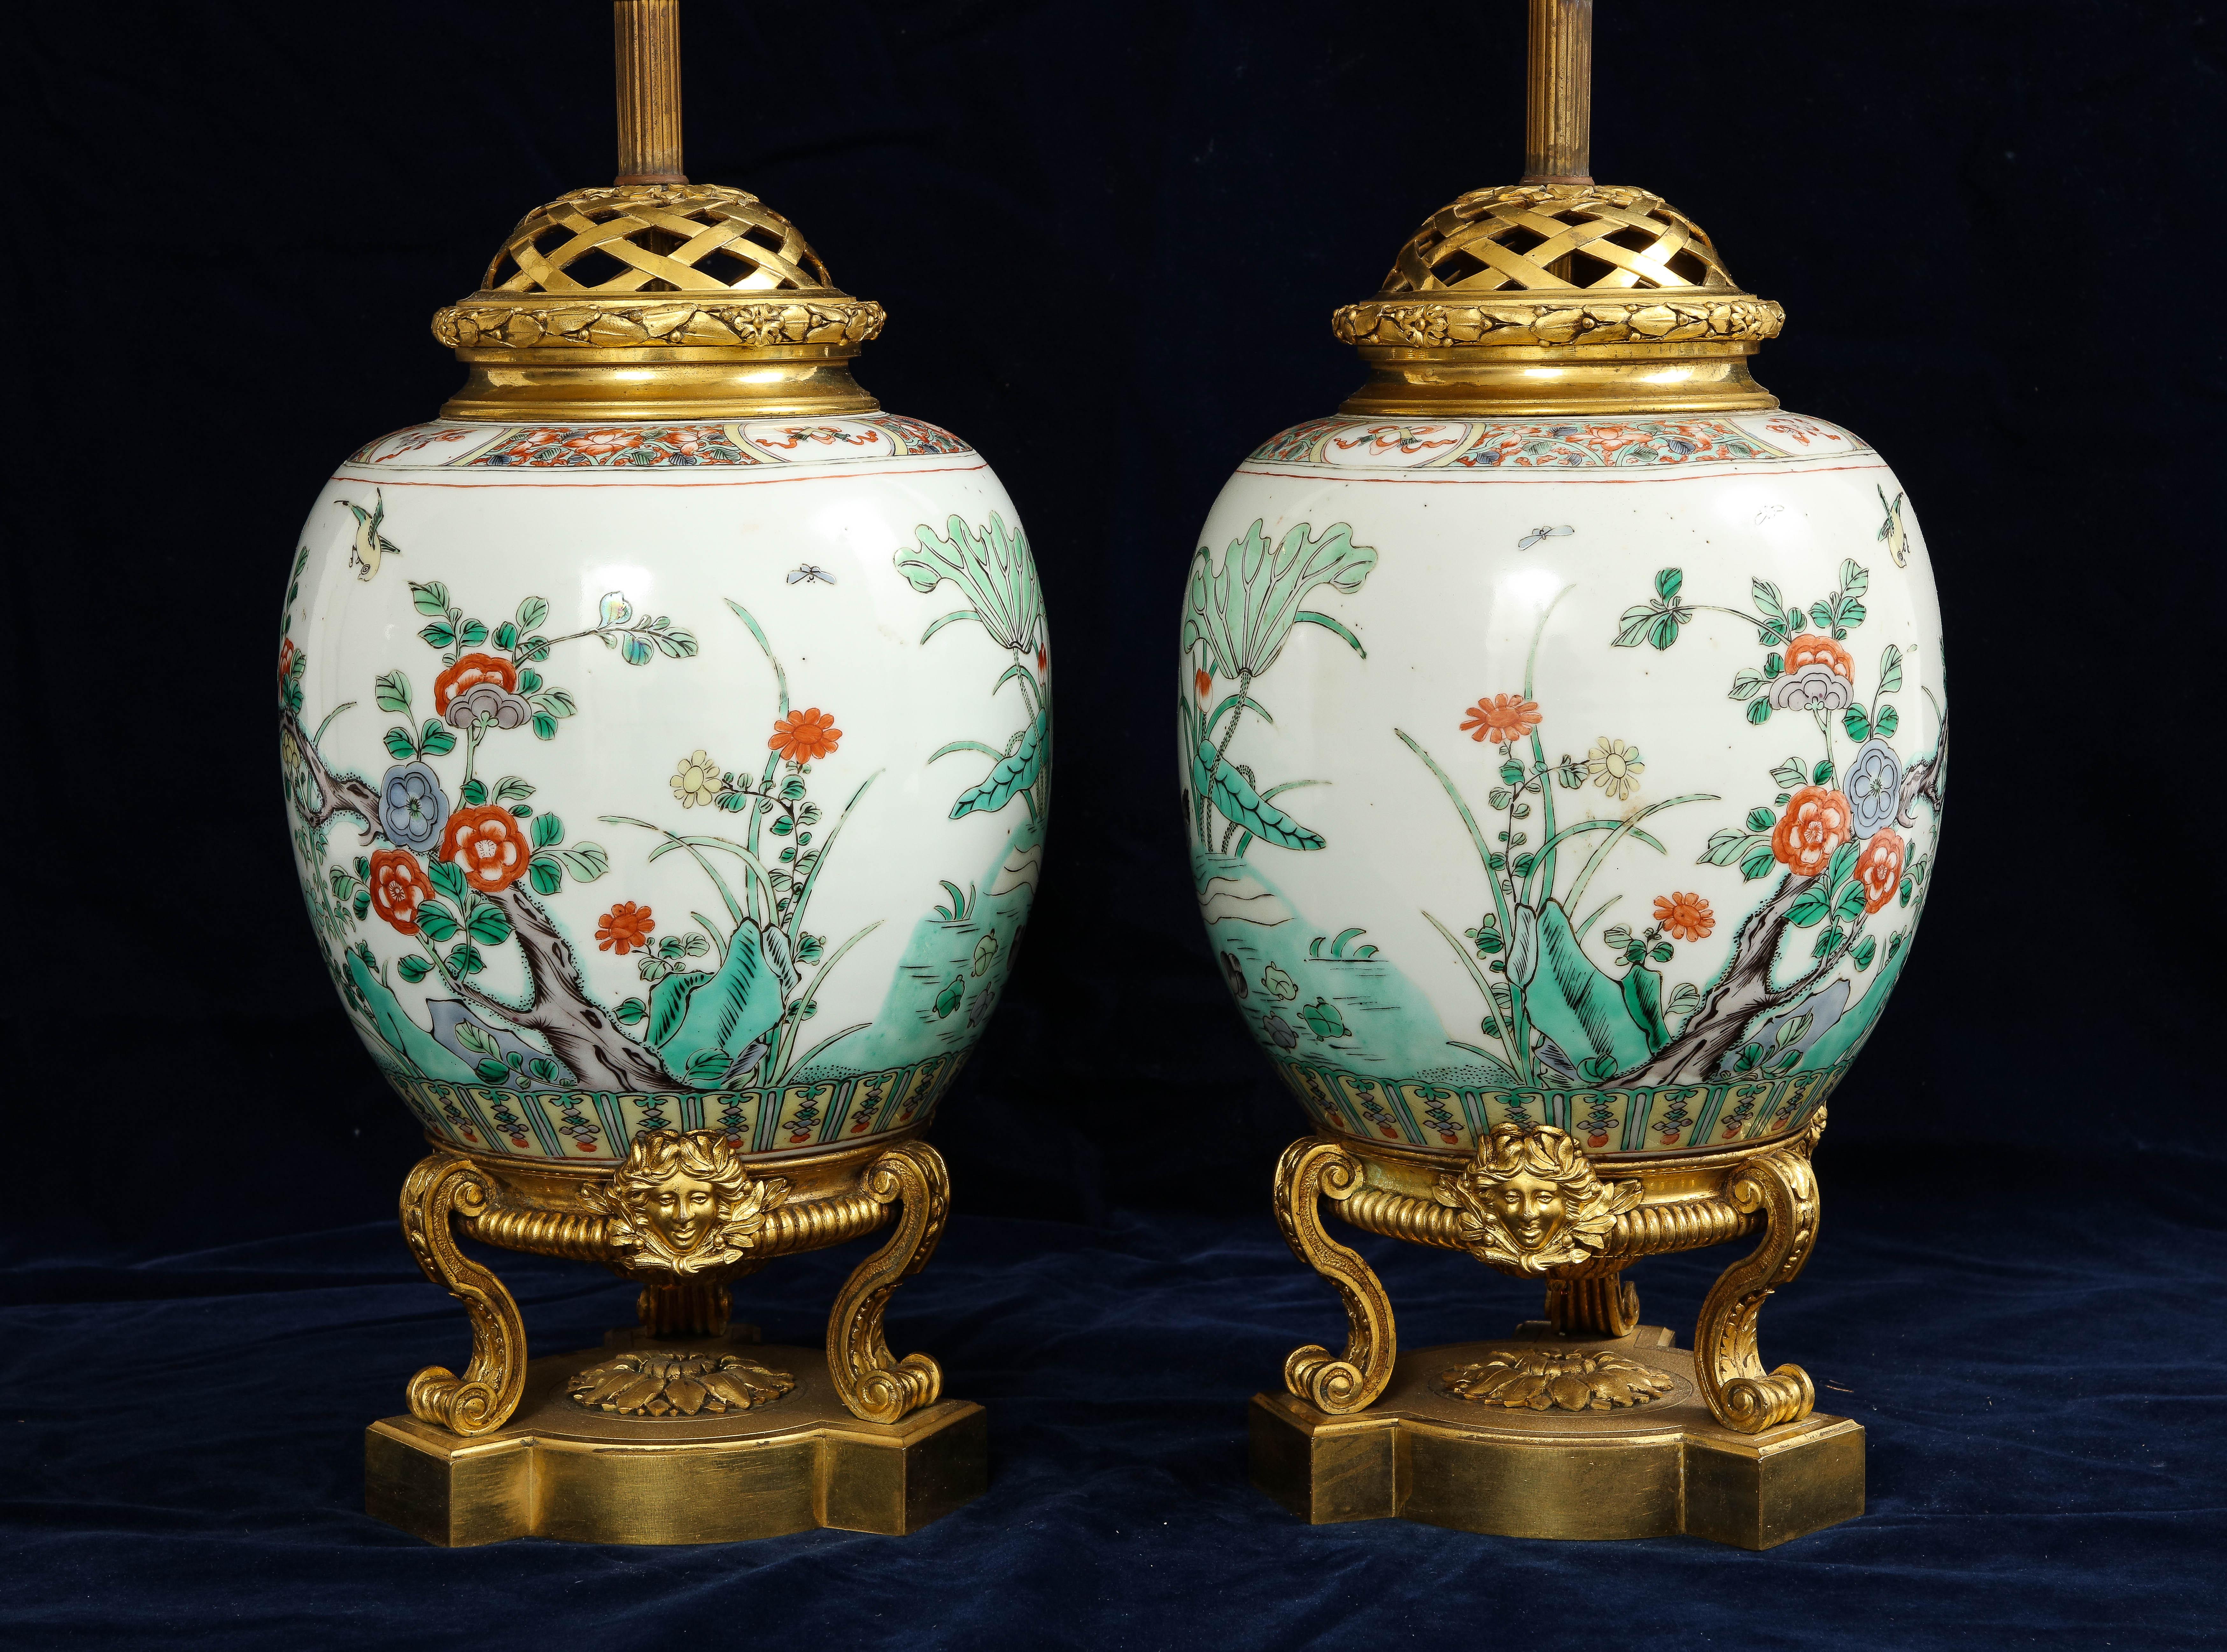 Hand-Painted Pair 19th C Ormolu Mounted Chinese Famille Verte Porcelain Vases Turned to Lamps For Sale